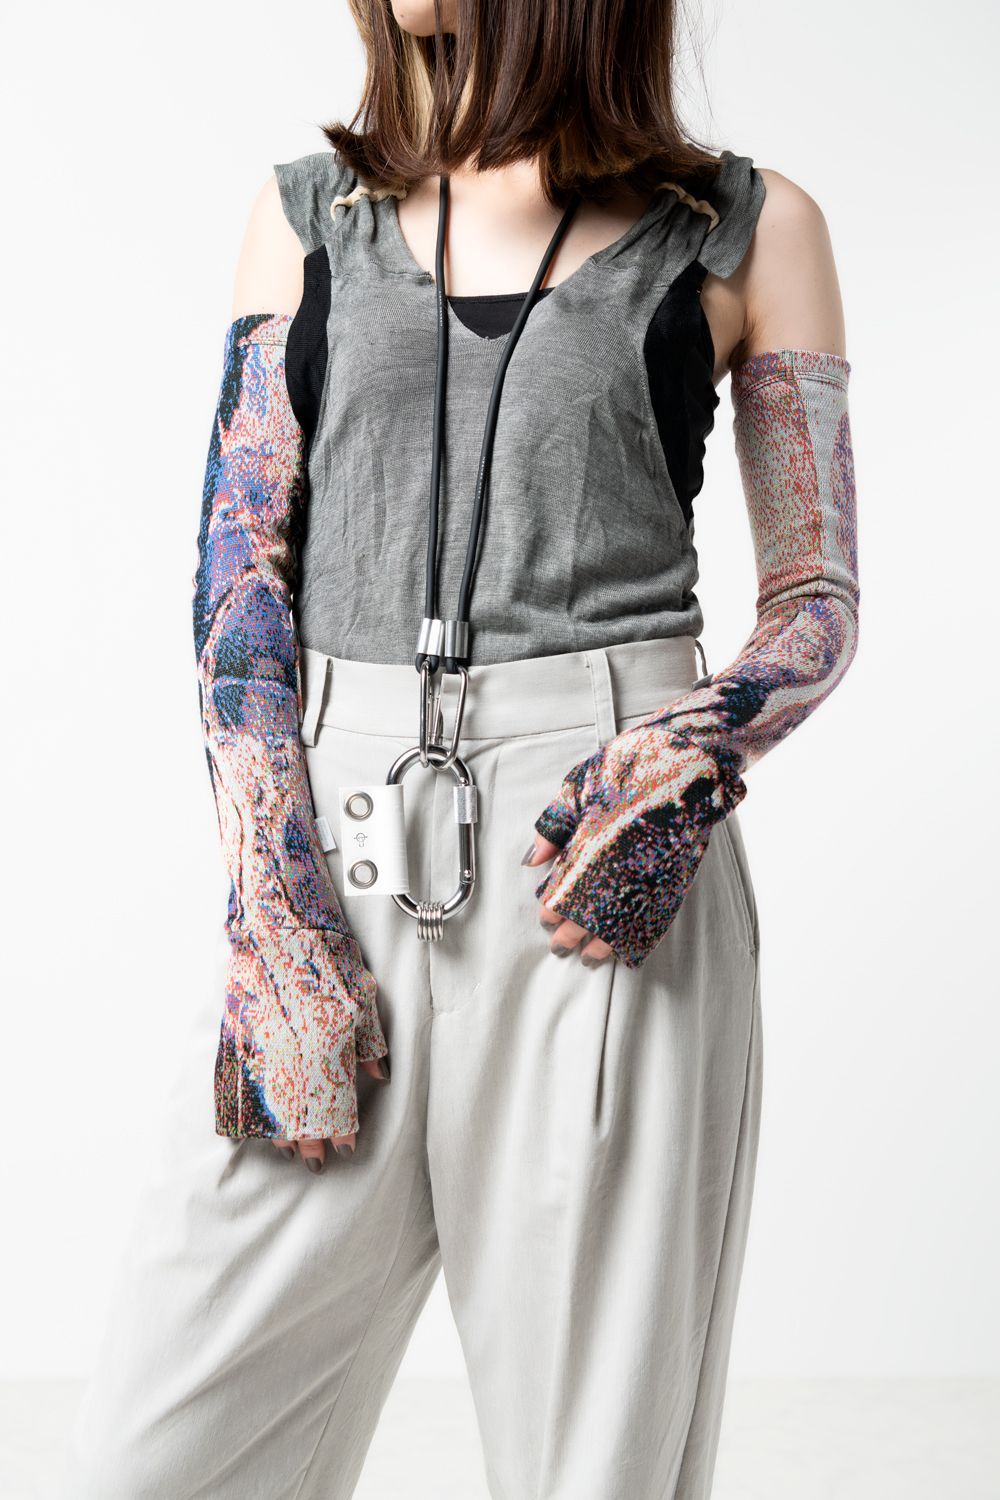 HATRA ハトラ INK SCAPE ARM COVER ATMOSPHERE-